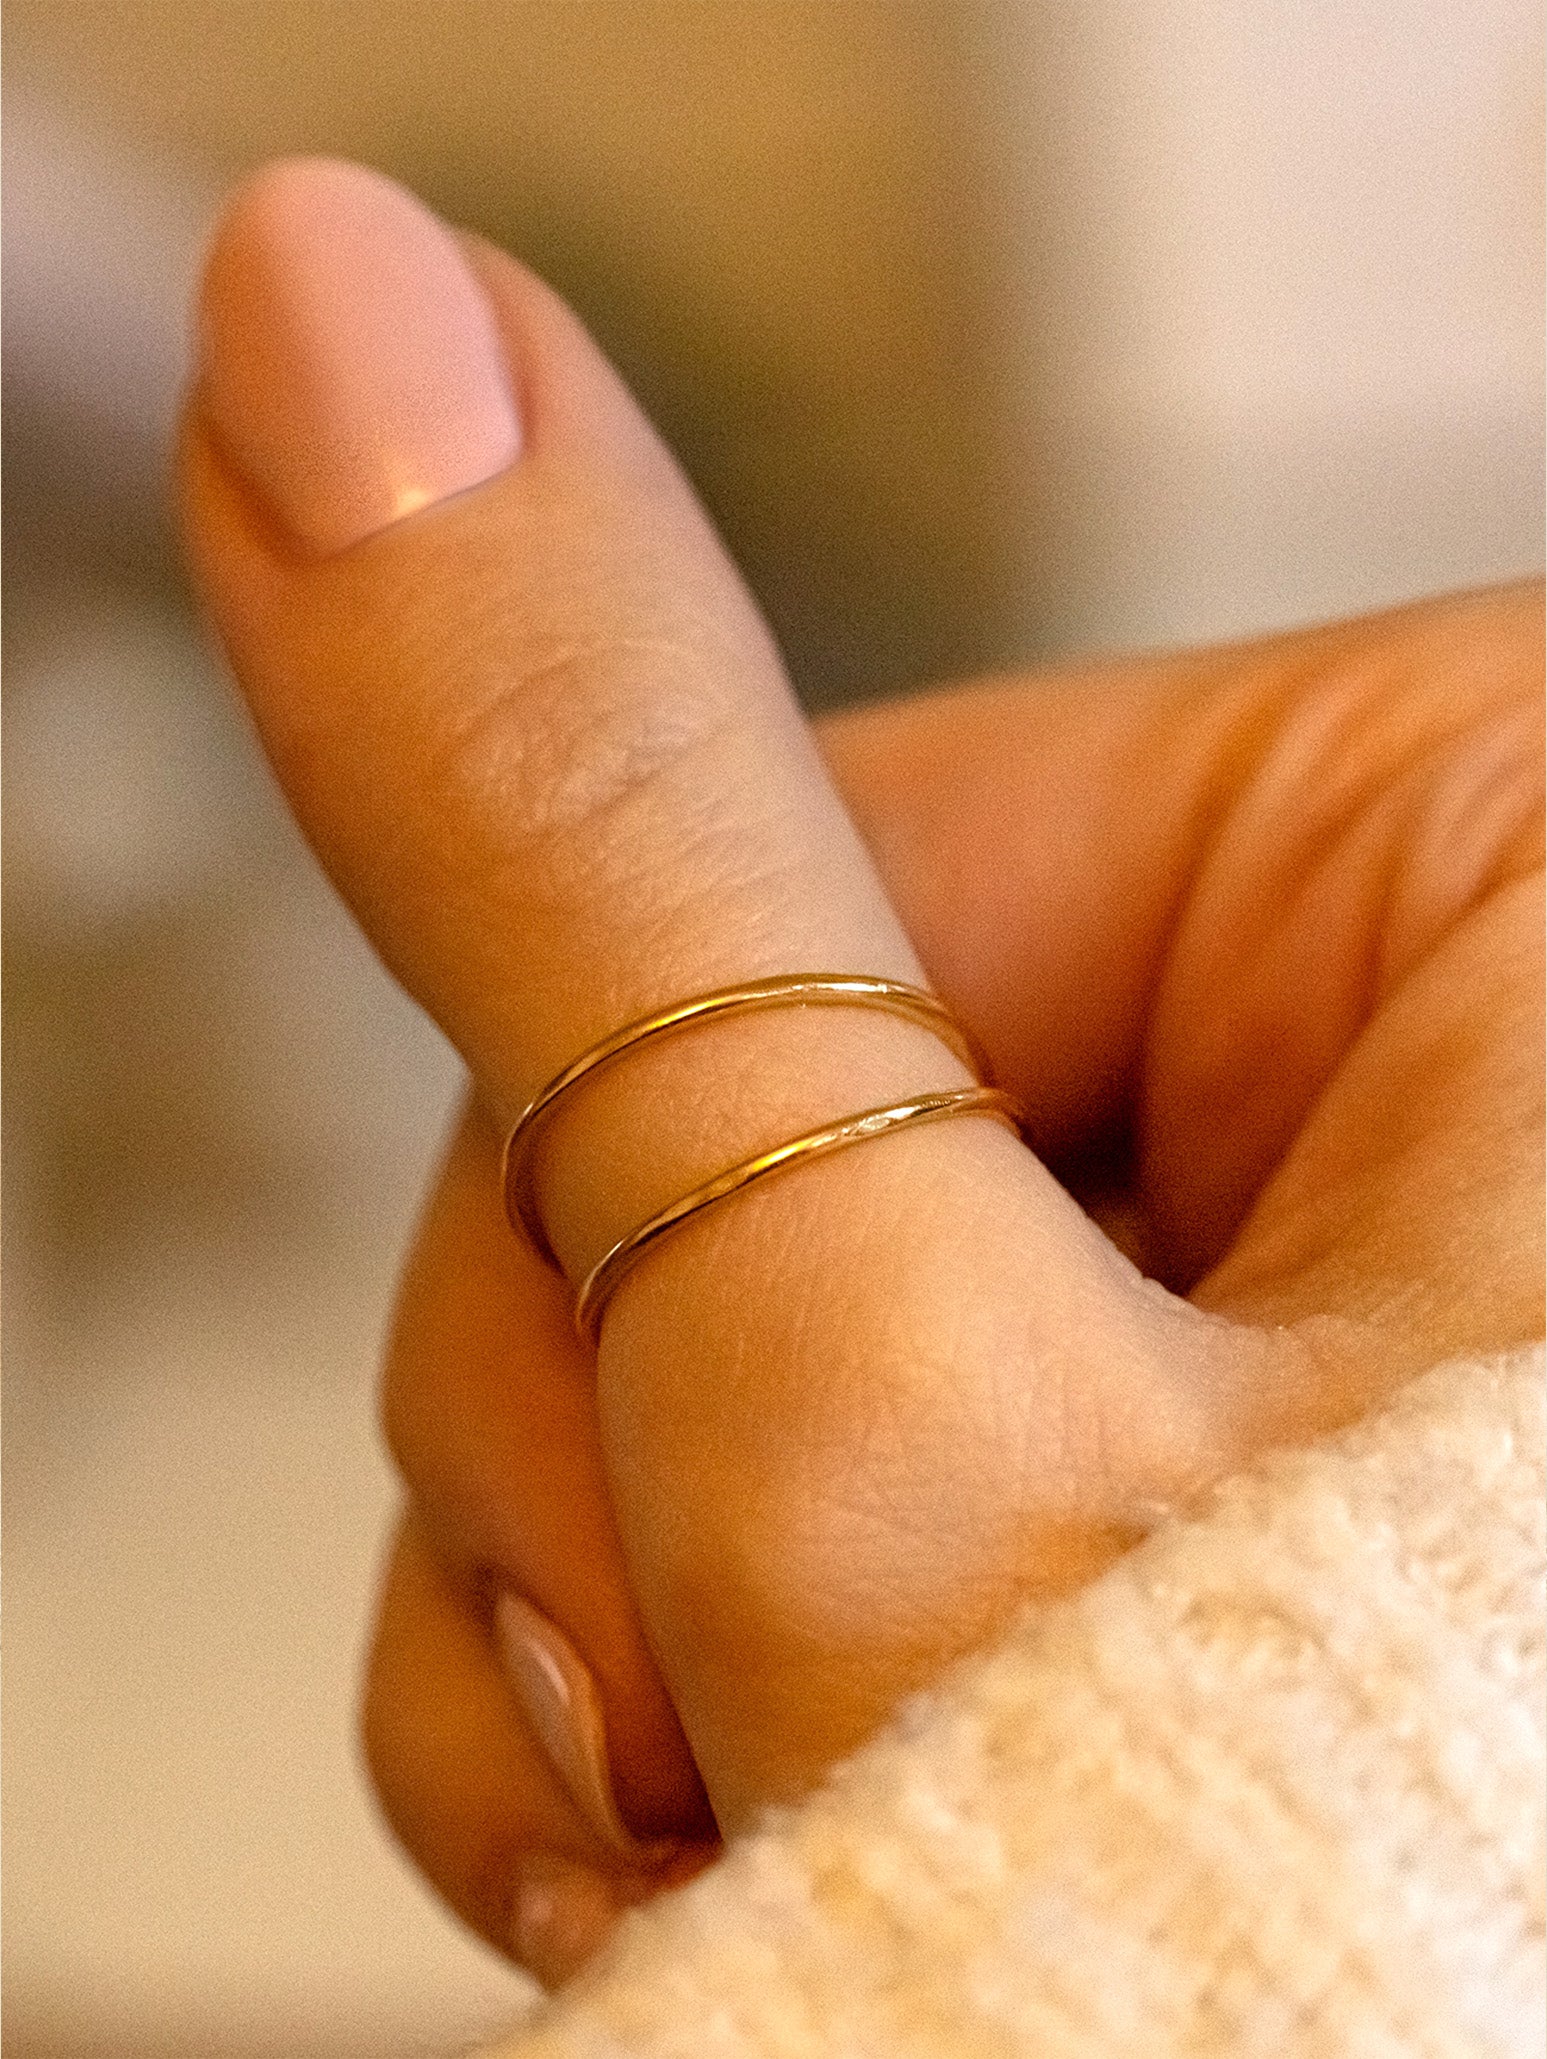 Thin Adjustable Wave Ring - Double Band